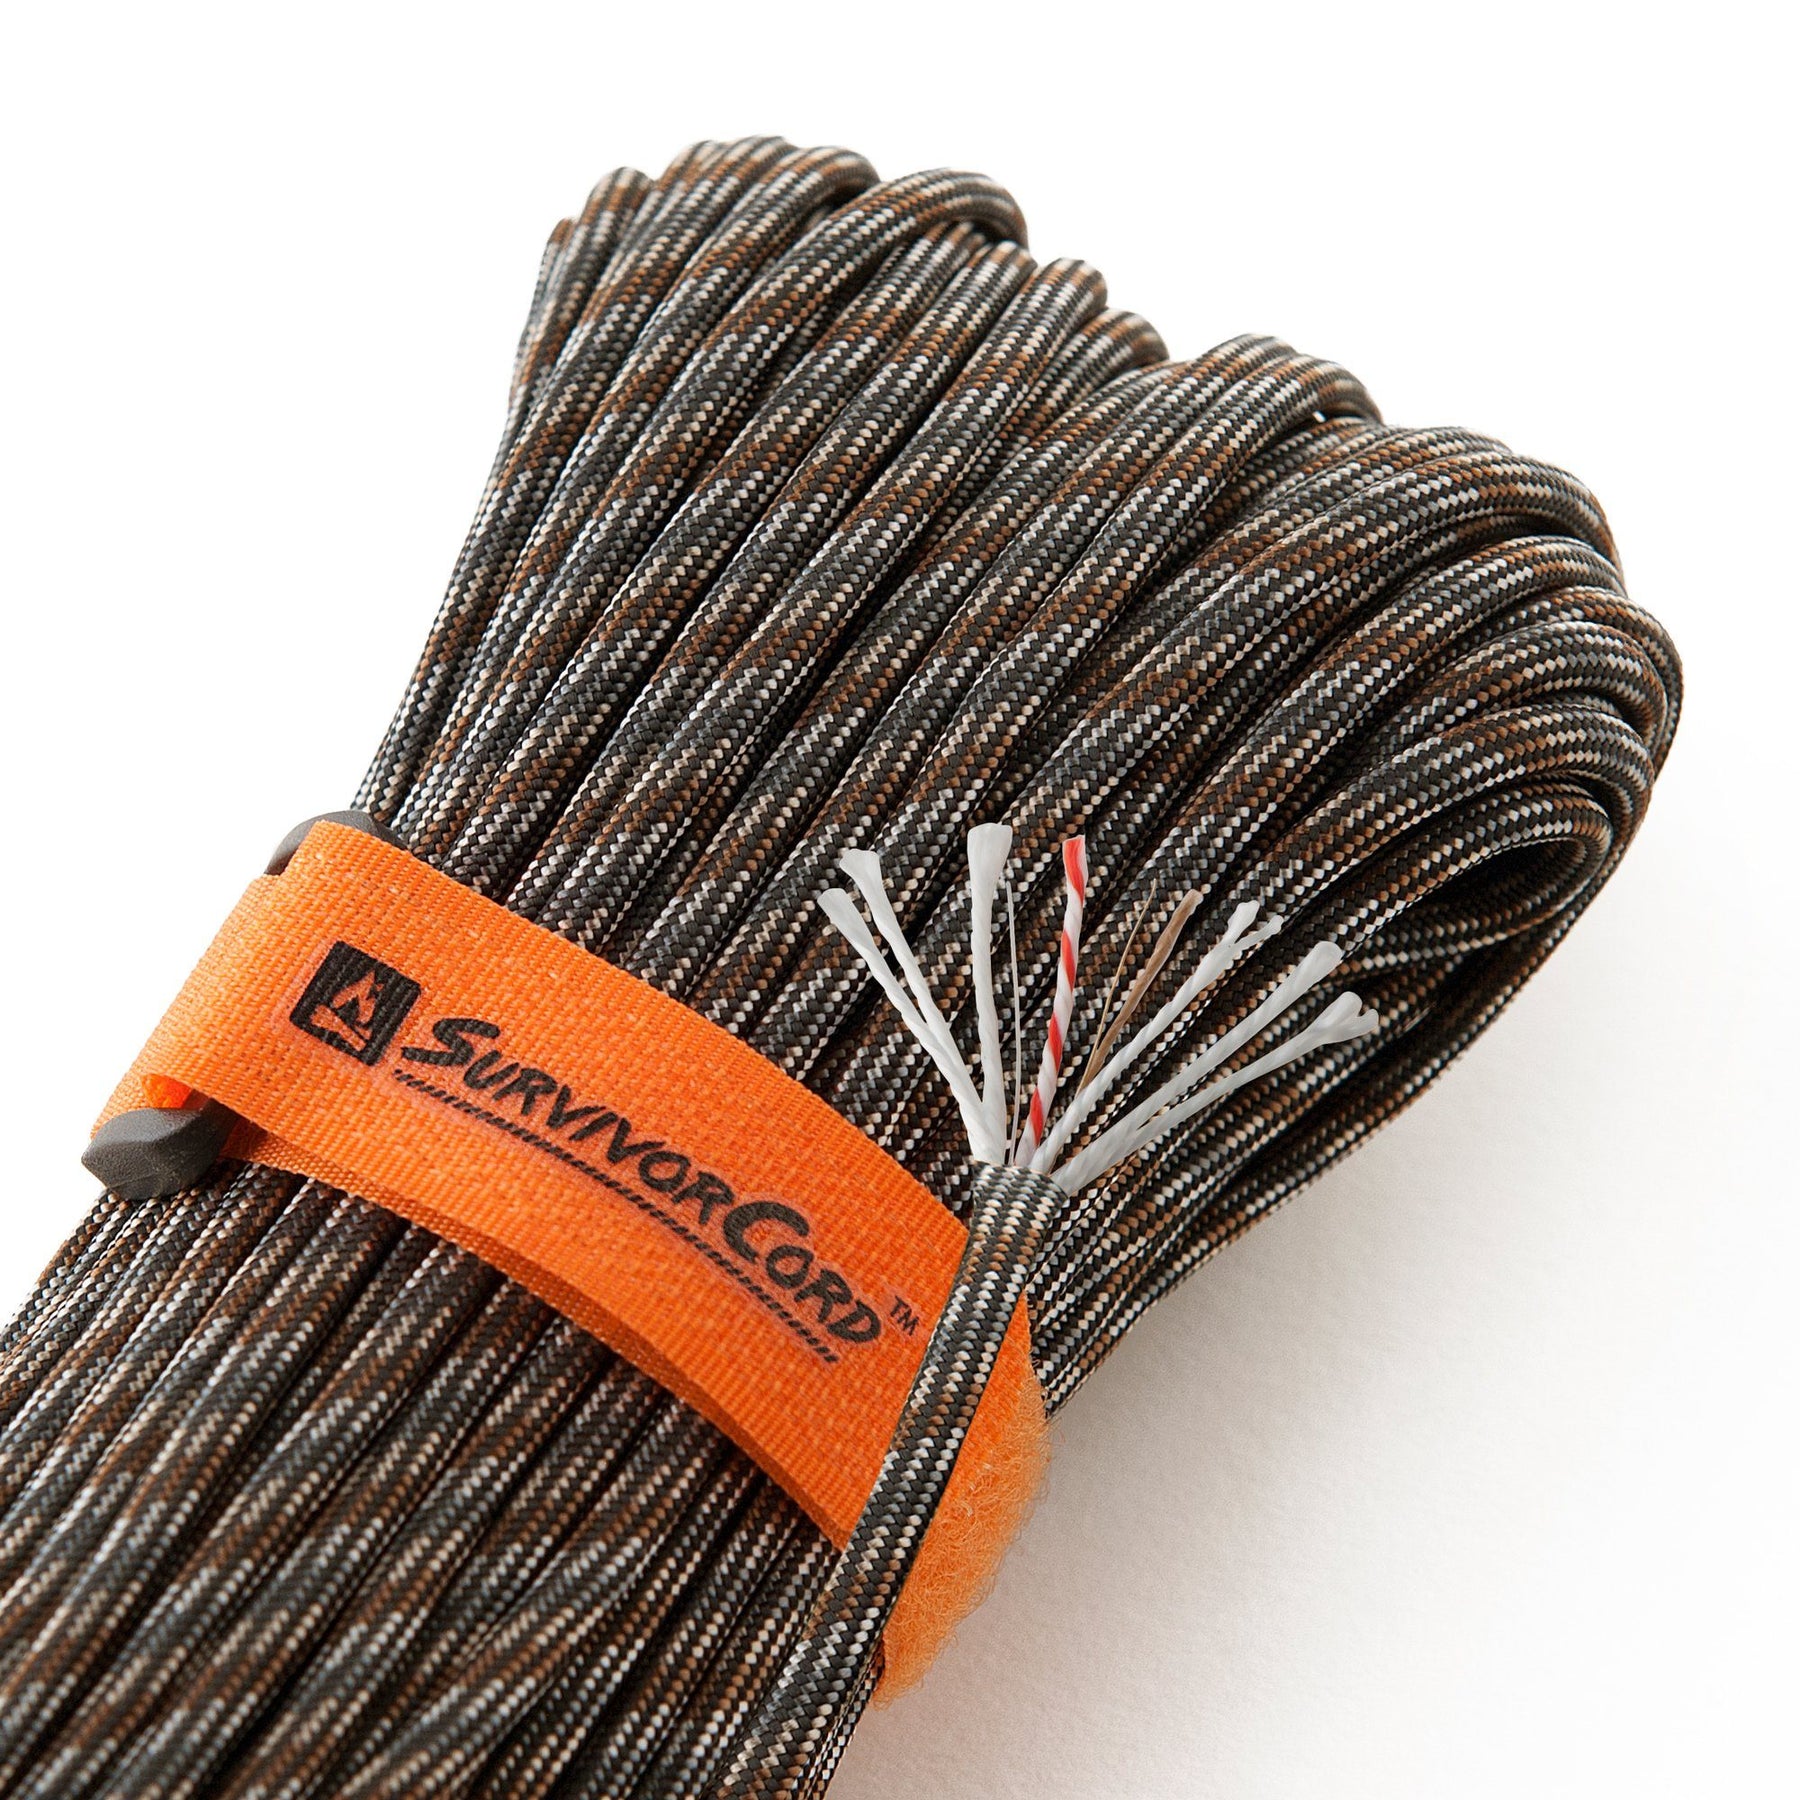 Titan SurvivorCord | 30m | Patented Military Type III 550 Paracord/Parachute Cord (3/16 Diameter) with Integrated Fishing Line, Fire-Starter